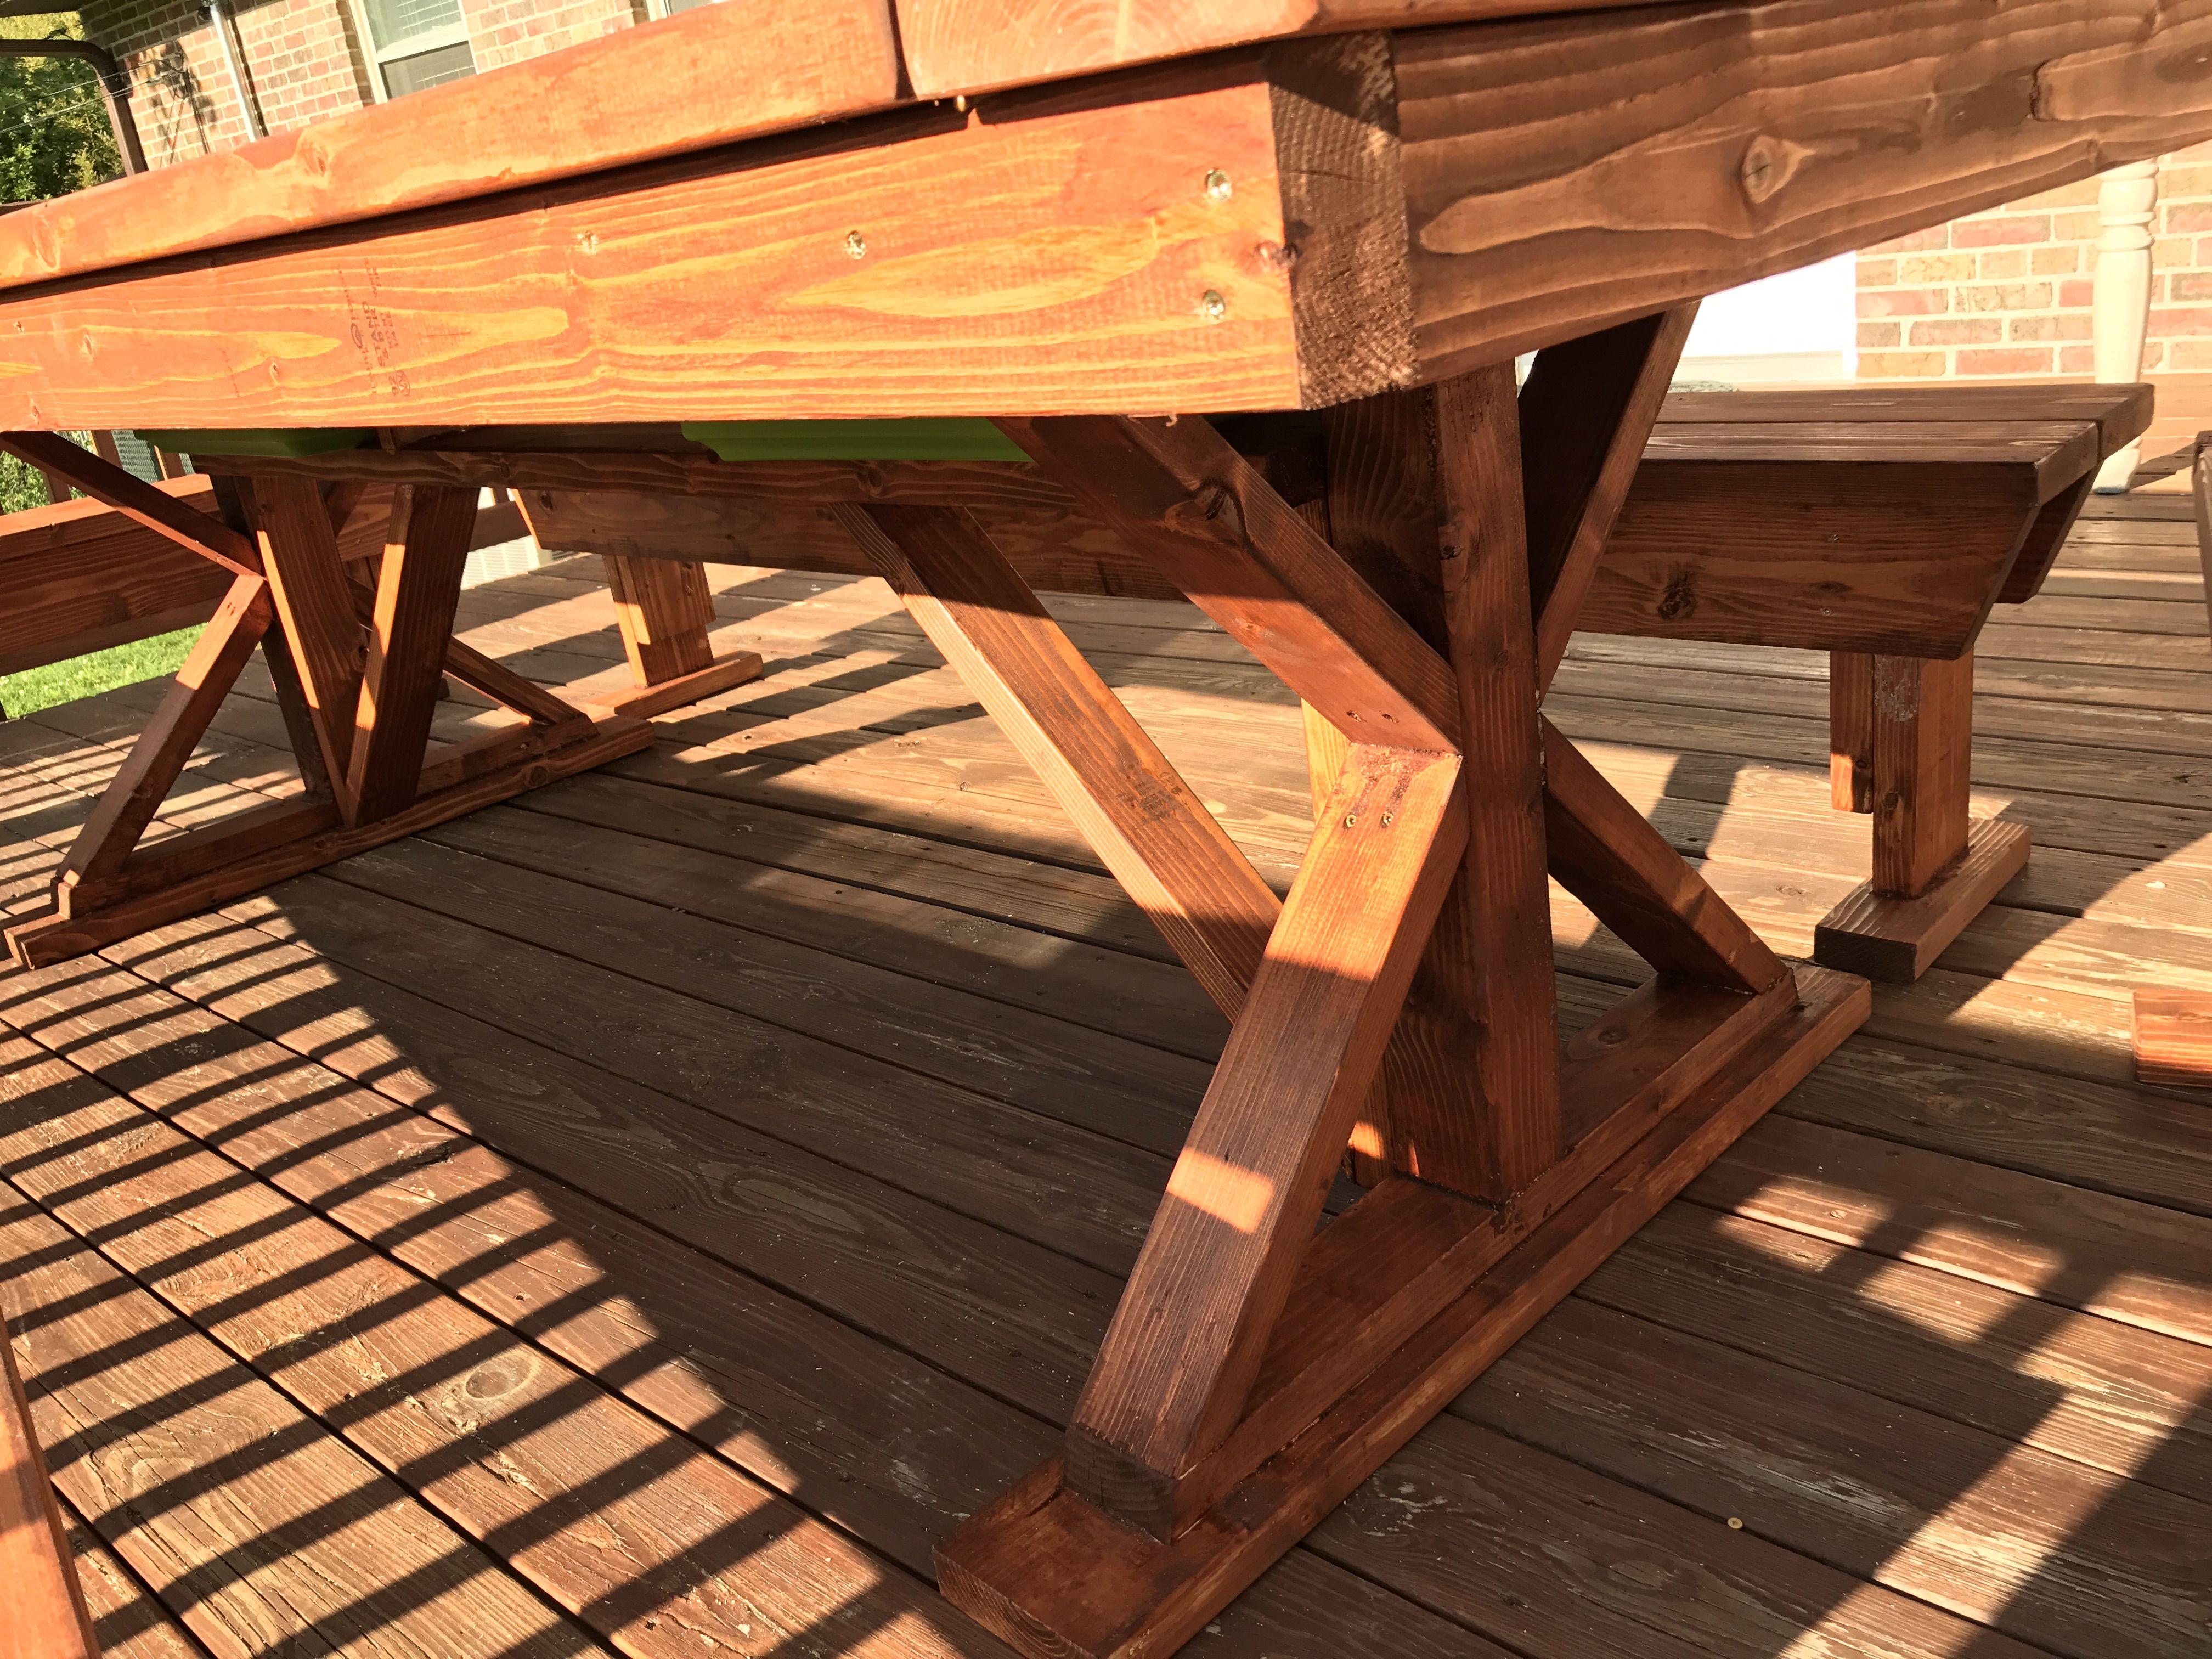 Hand Made Picnic Table With Built In Coolers By Jon Hartle Design